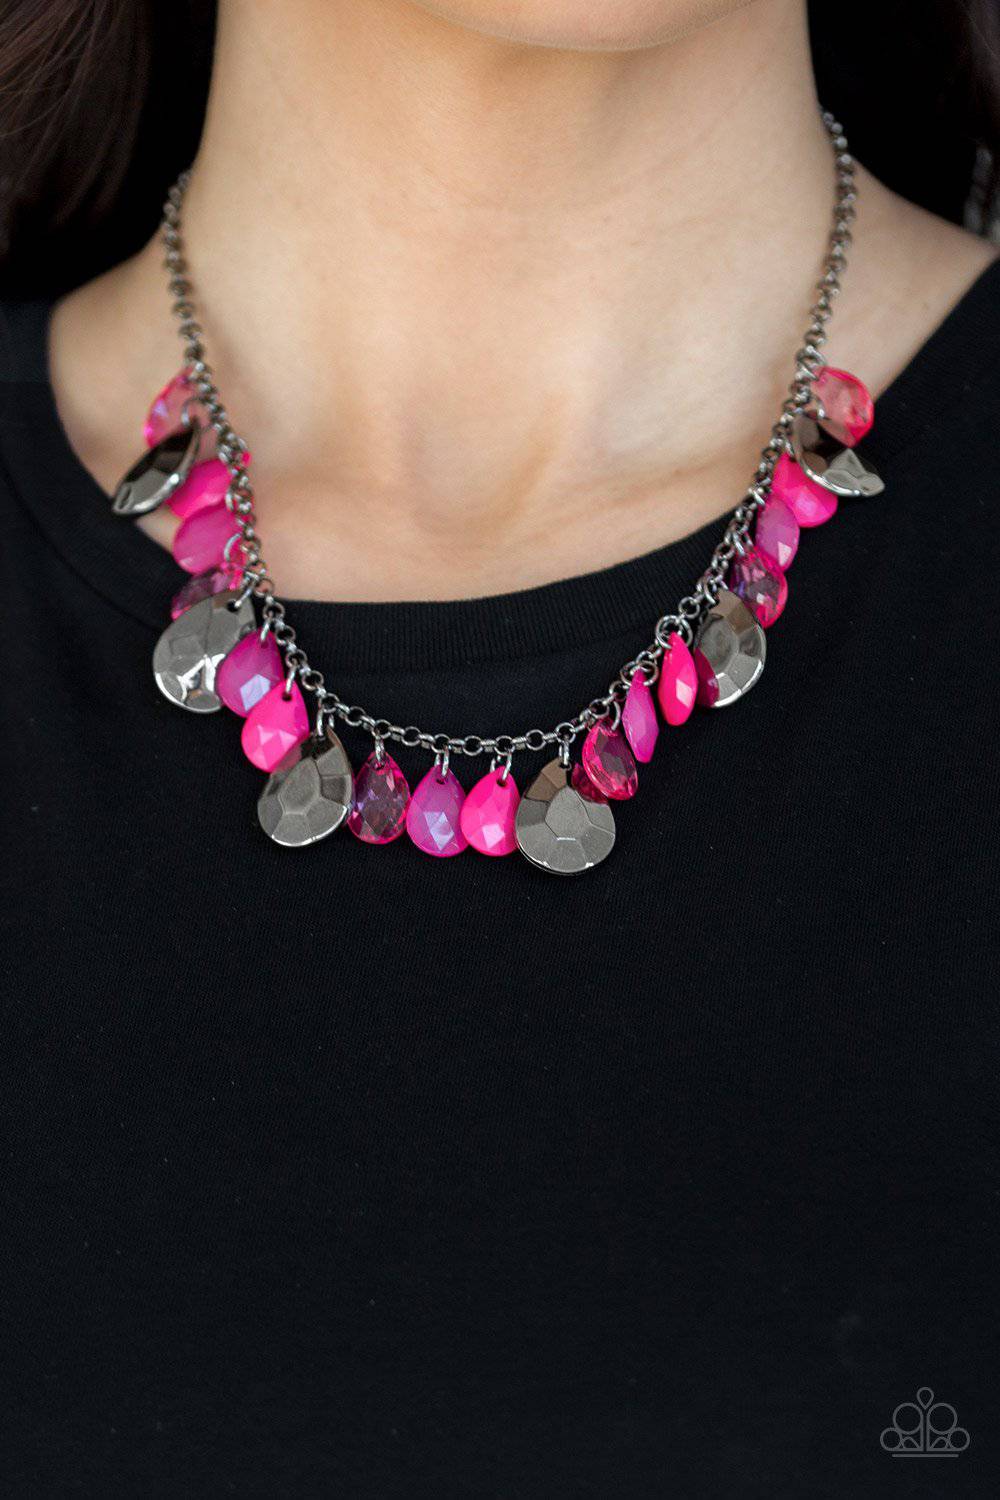 A78 - Hurricane Season Pink Necklace by Paparazzi Accessories on Fancy5Fashion.com